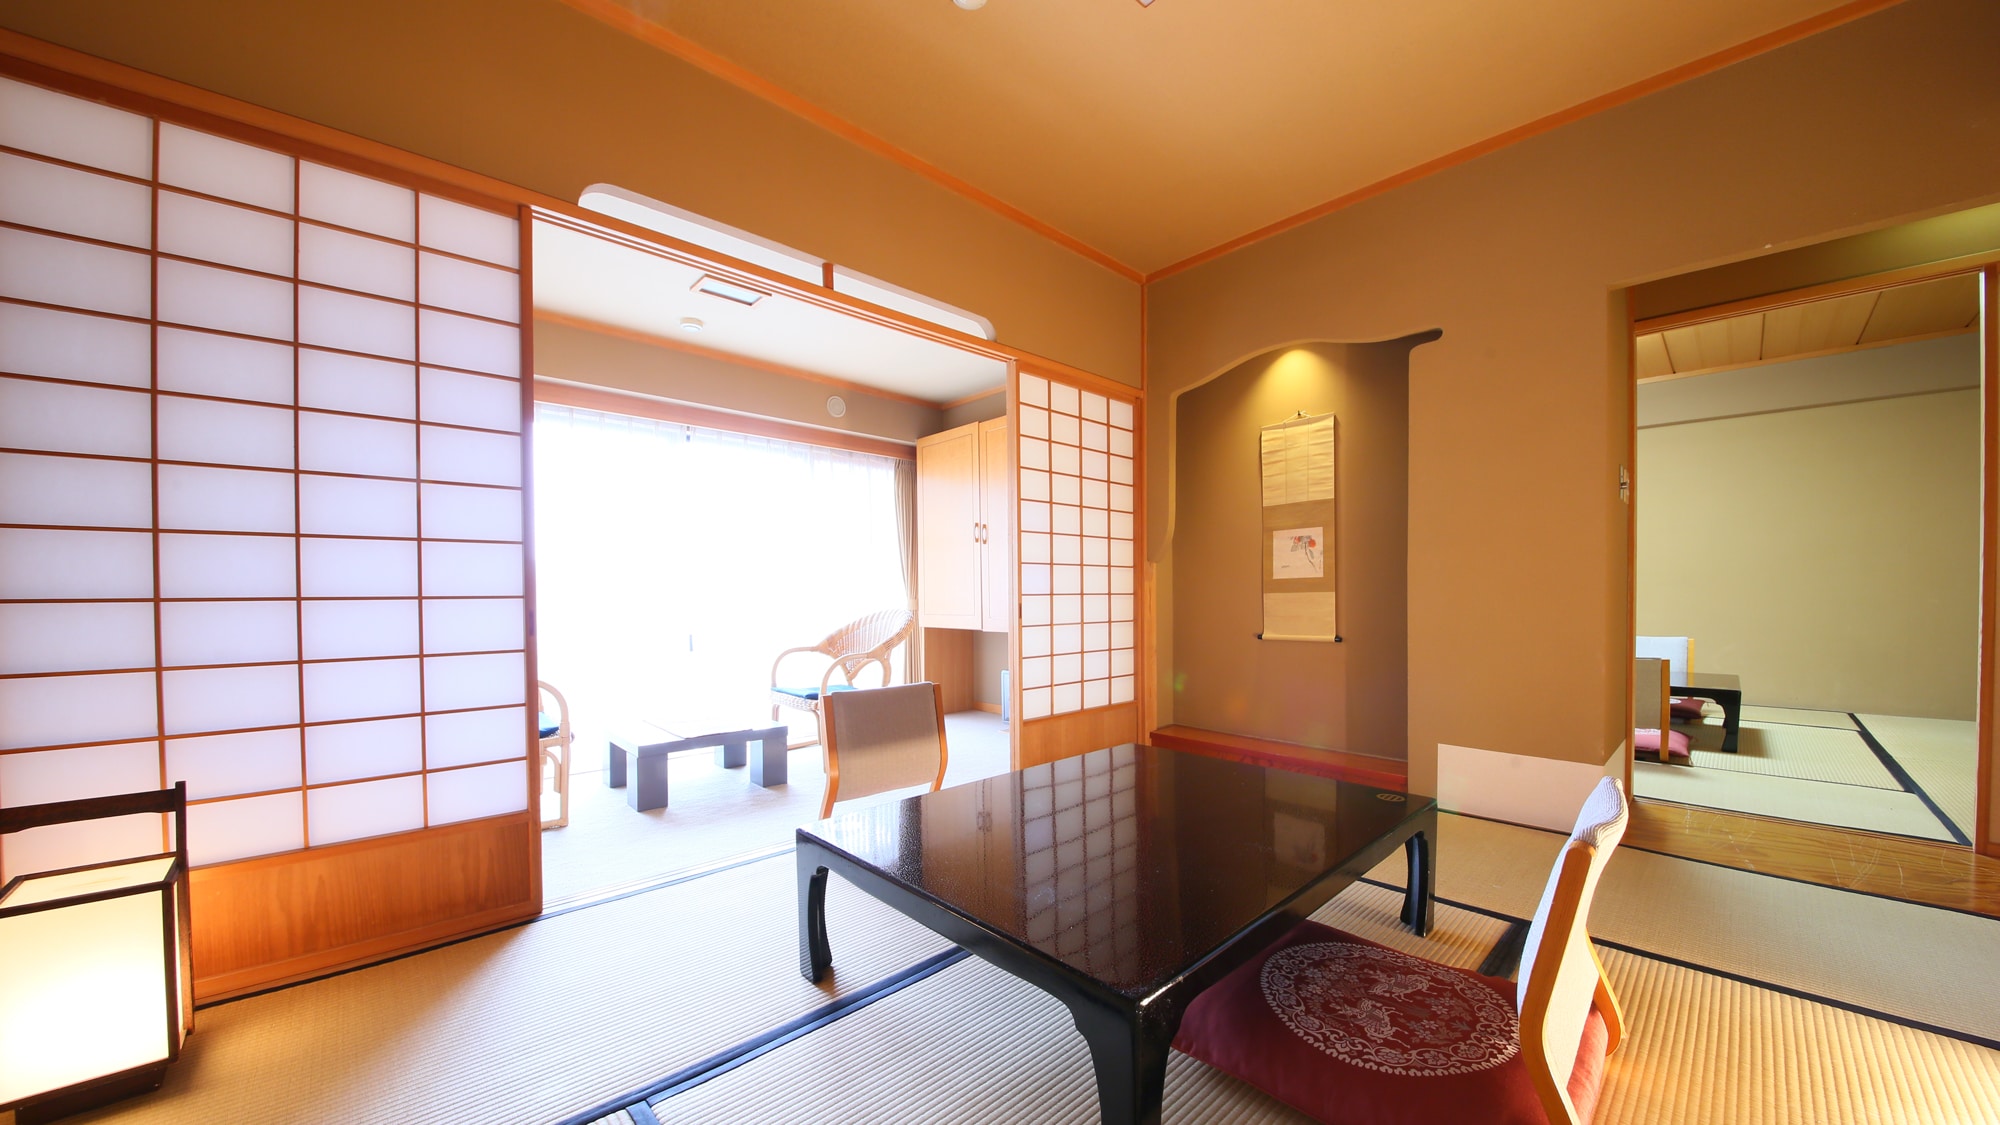 [10 + 7 tatami mats] A spacious room with two consecutive rooms.